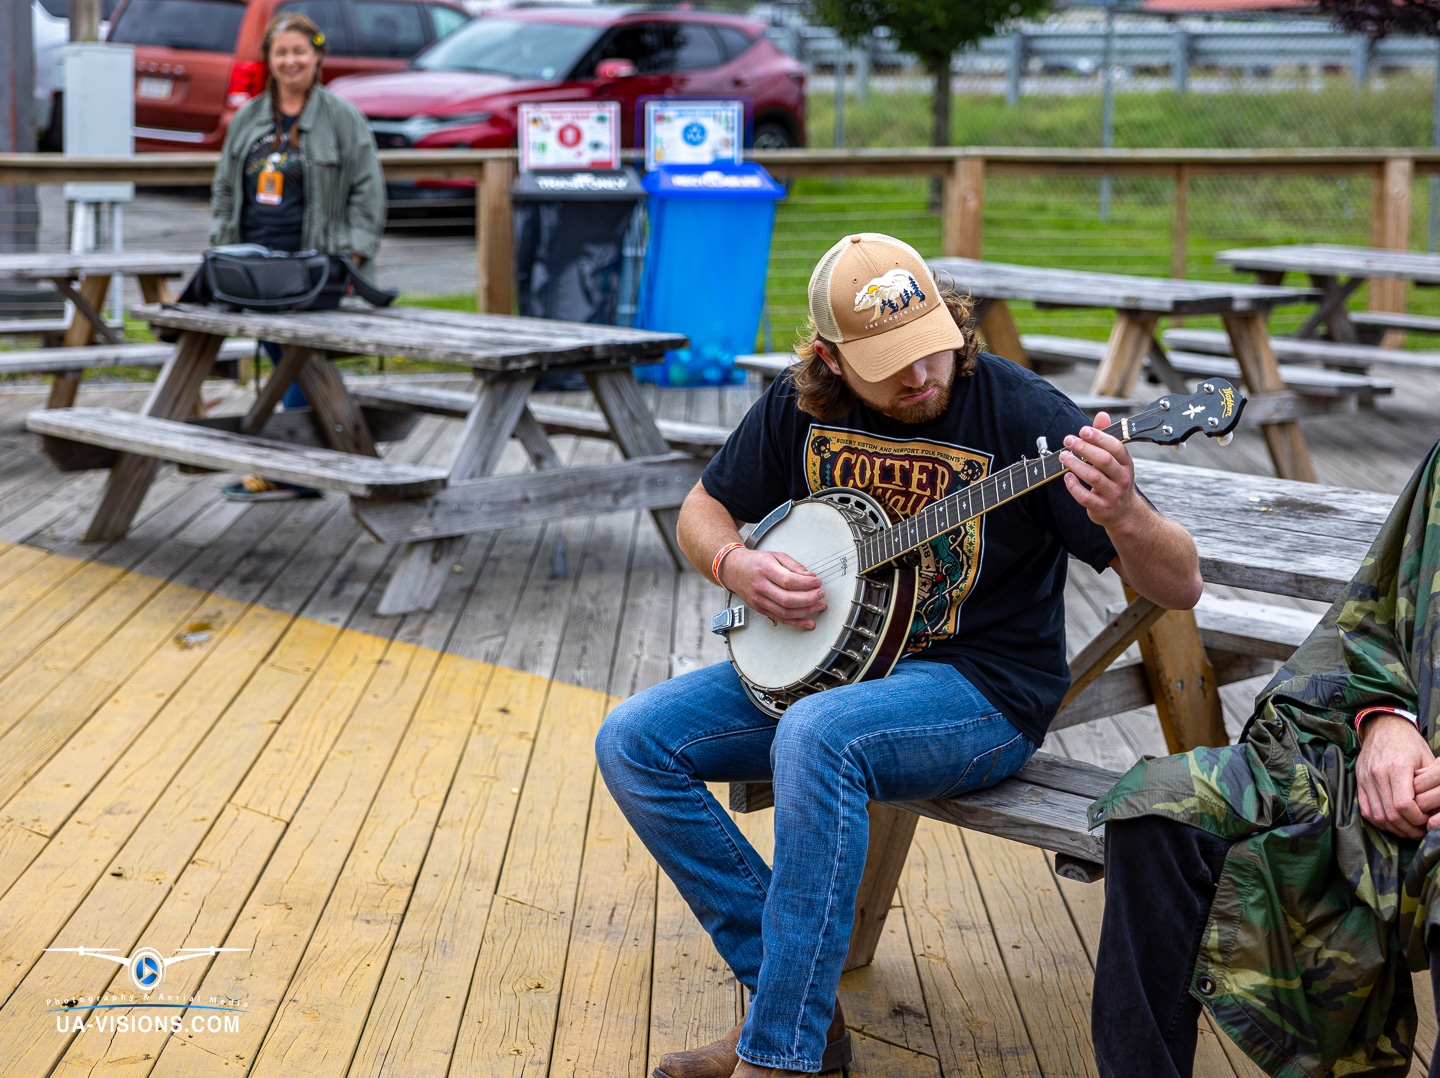 A banjo player finds his rhythm on a wooden deck at Healing Appalachia, the sound echoing tradition.